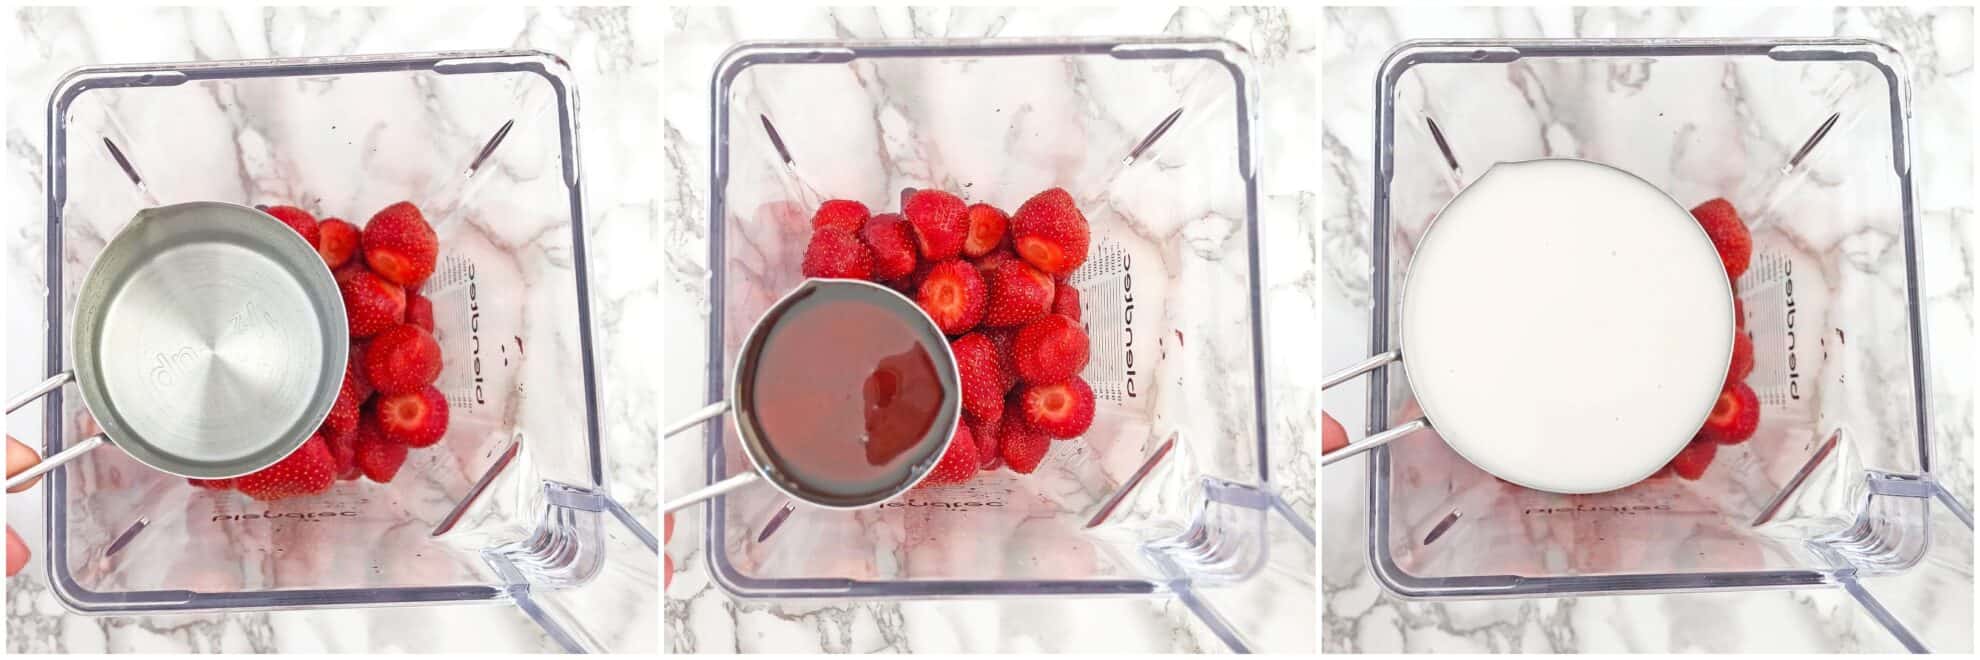 Next, add strawberries into a Blendtec blender, then add water, maple syrup, and nut milk. 